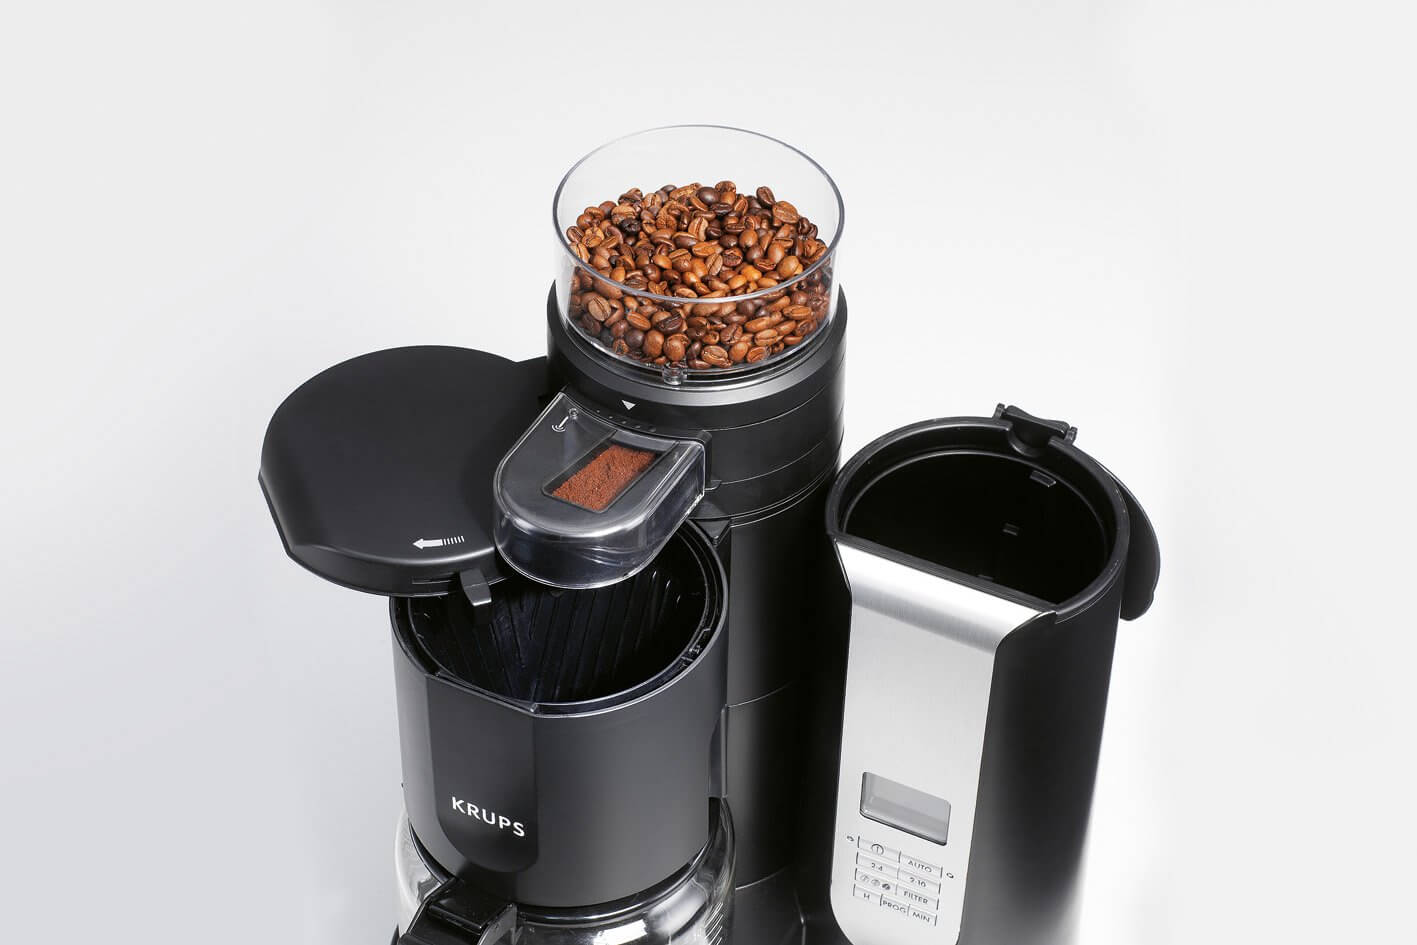 Krups 625-70 Grinder & Brewer Coffee Maker with Programmable Timer, coffee machines with grinders, types of coffee maker